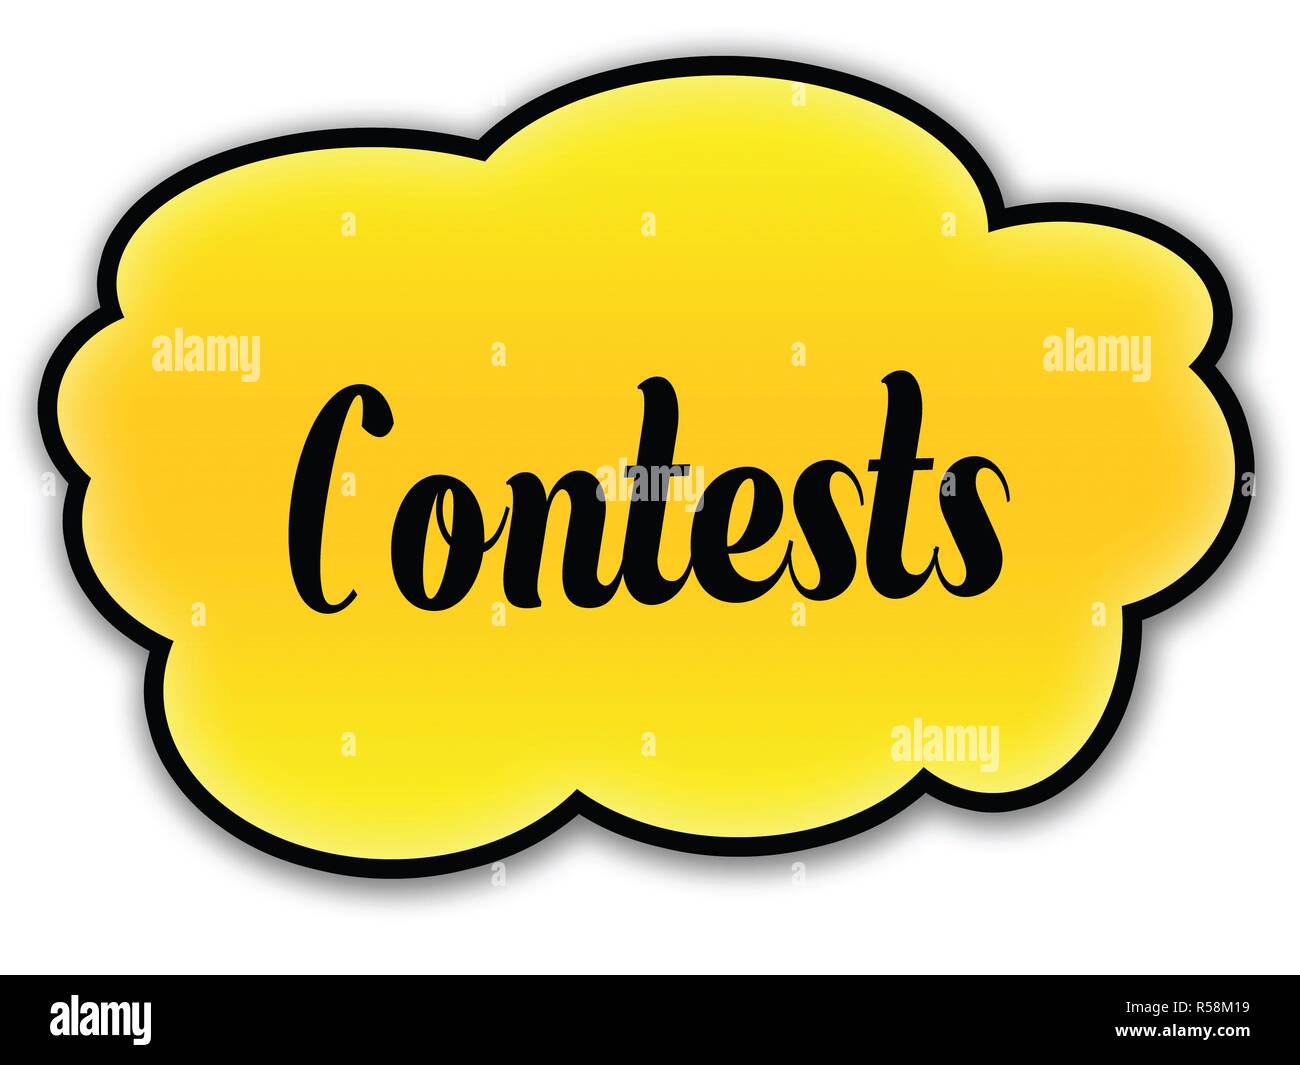 CONTESTS handwritten on yellow cloud with white background Stock Photo